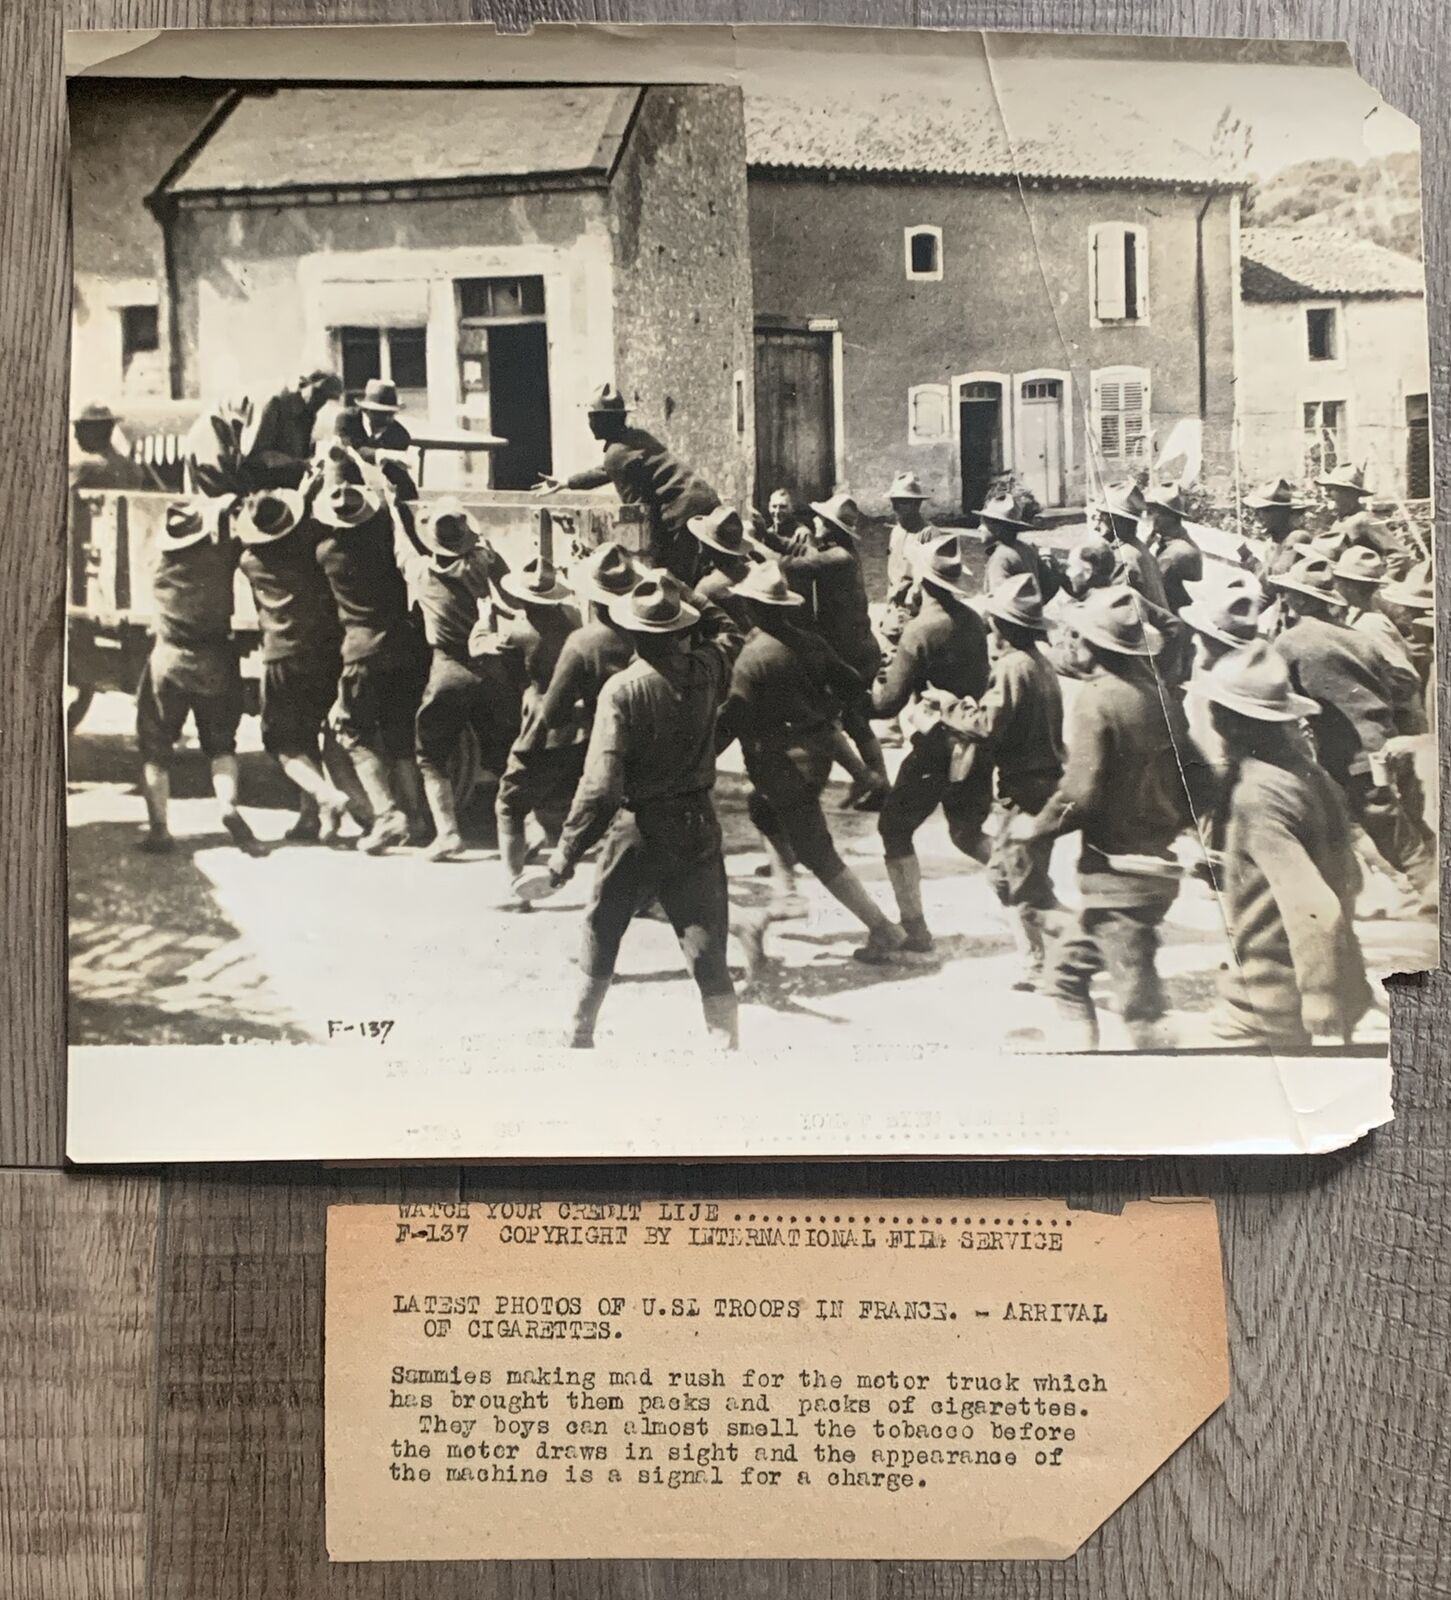 Vtg Press Photo WWI ~1917 US Troops Soldiers in France ‘Arrival of Cigarettes’